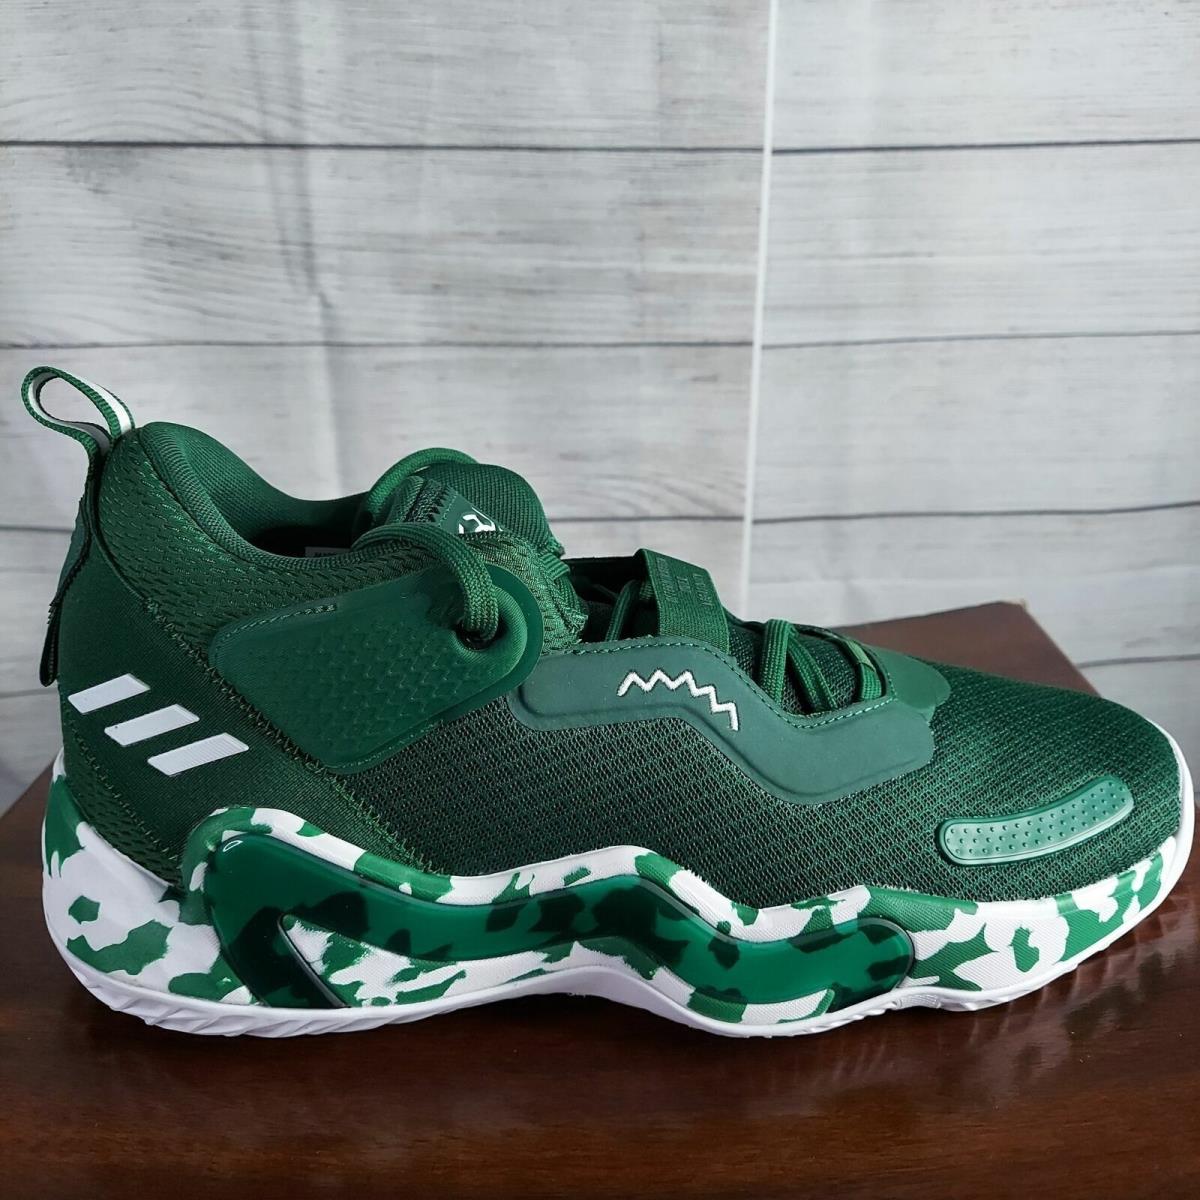 Adidas shoes Issue - Green 0